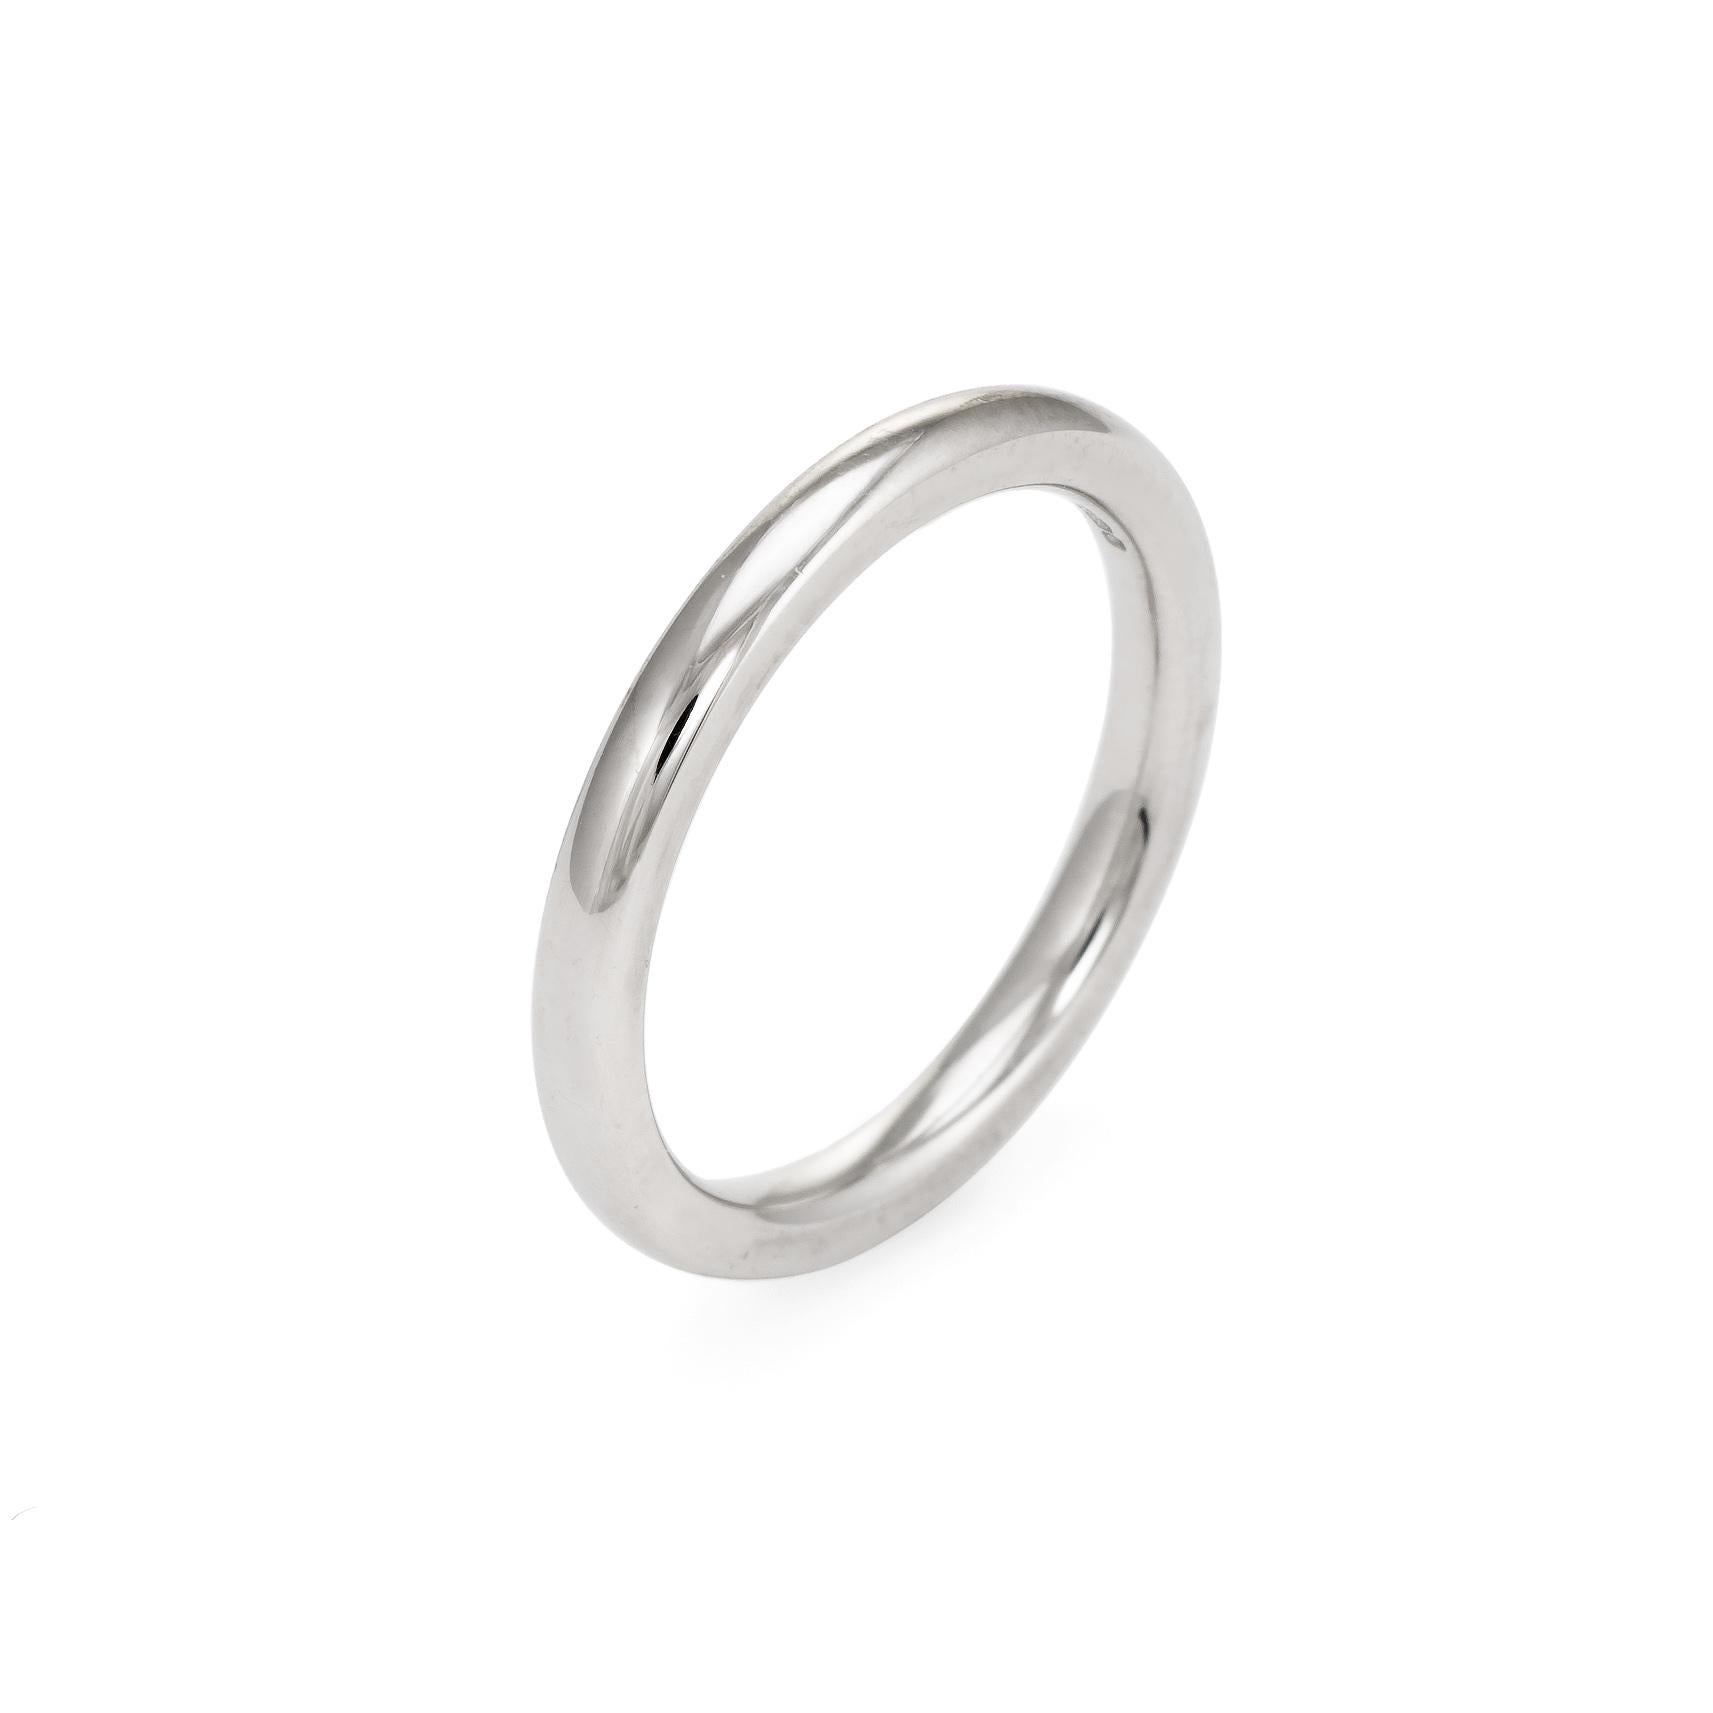 Finely made vintage wedding band, crafted in 950 platinum. 

The simple and elegant design of the ring makes it a great choice as a wedding band, stacked with your other fine rings or worn alone.

The ring is in excellent condition.